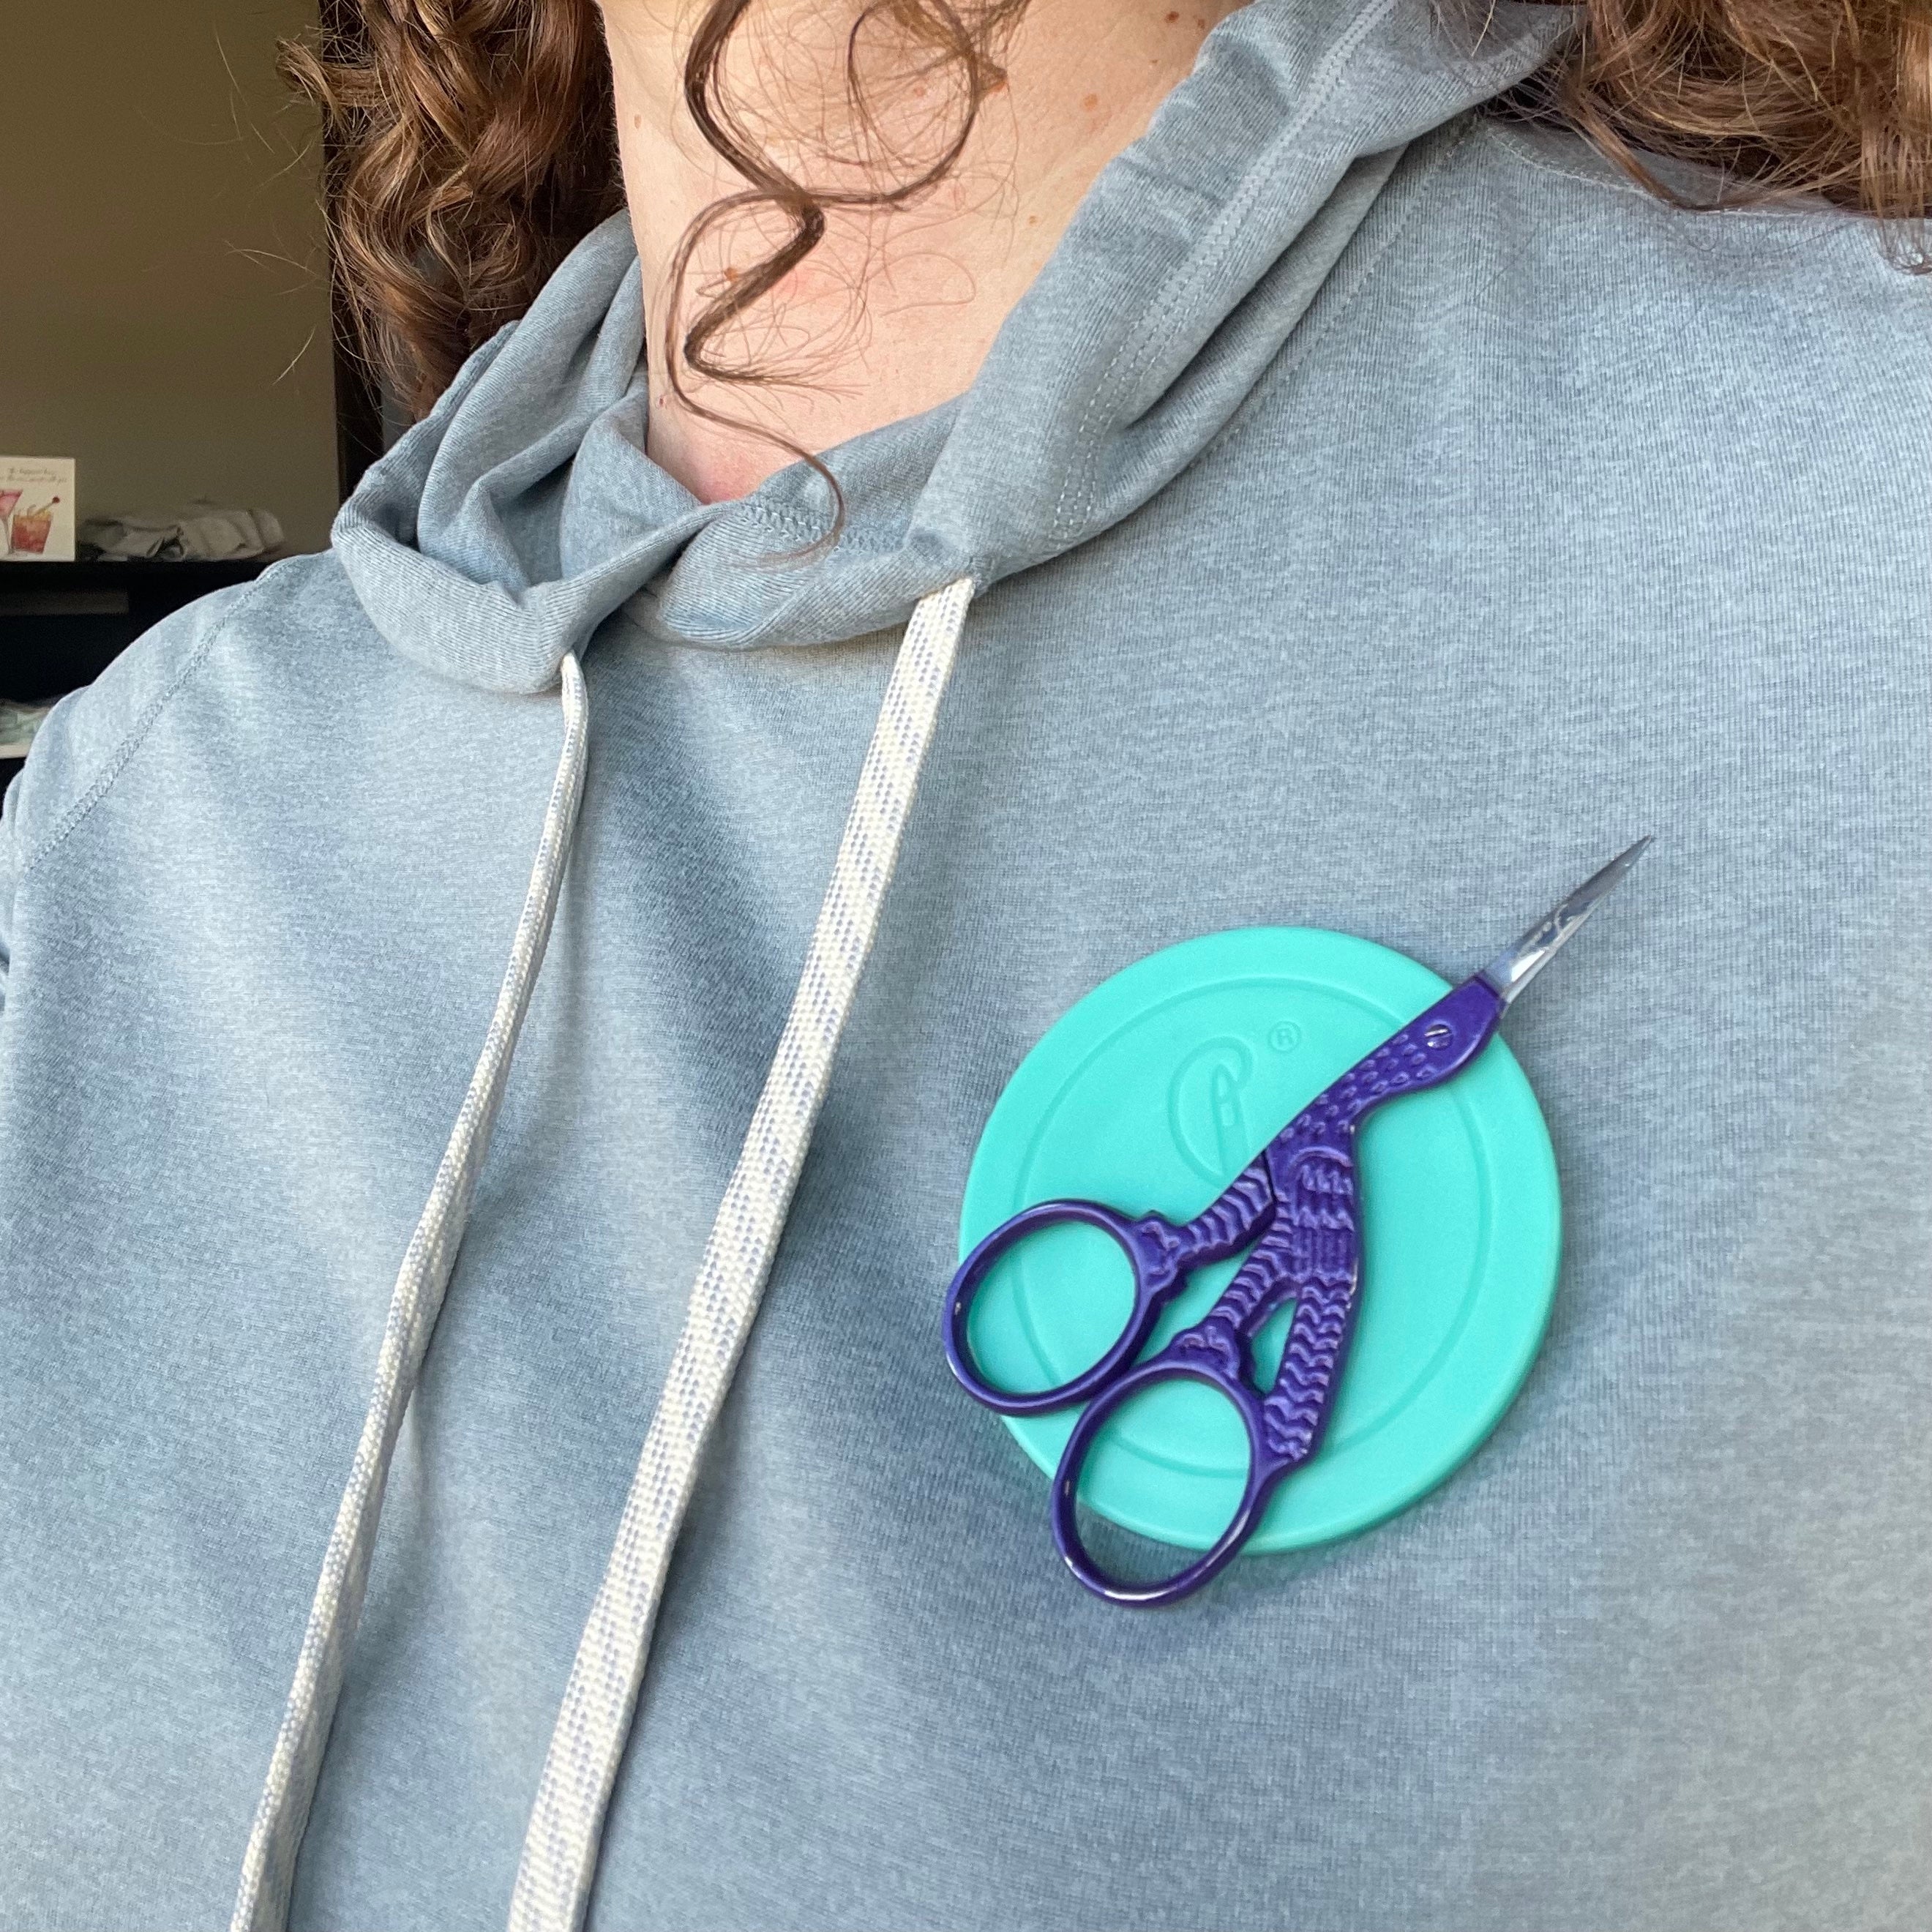 Pin on Wearable